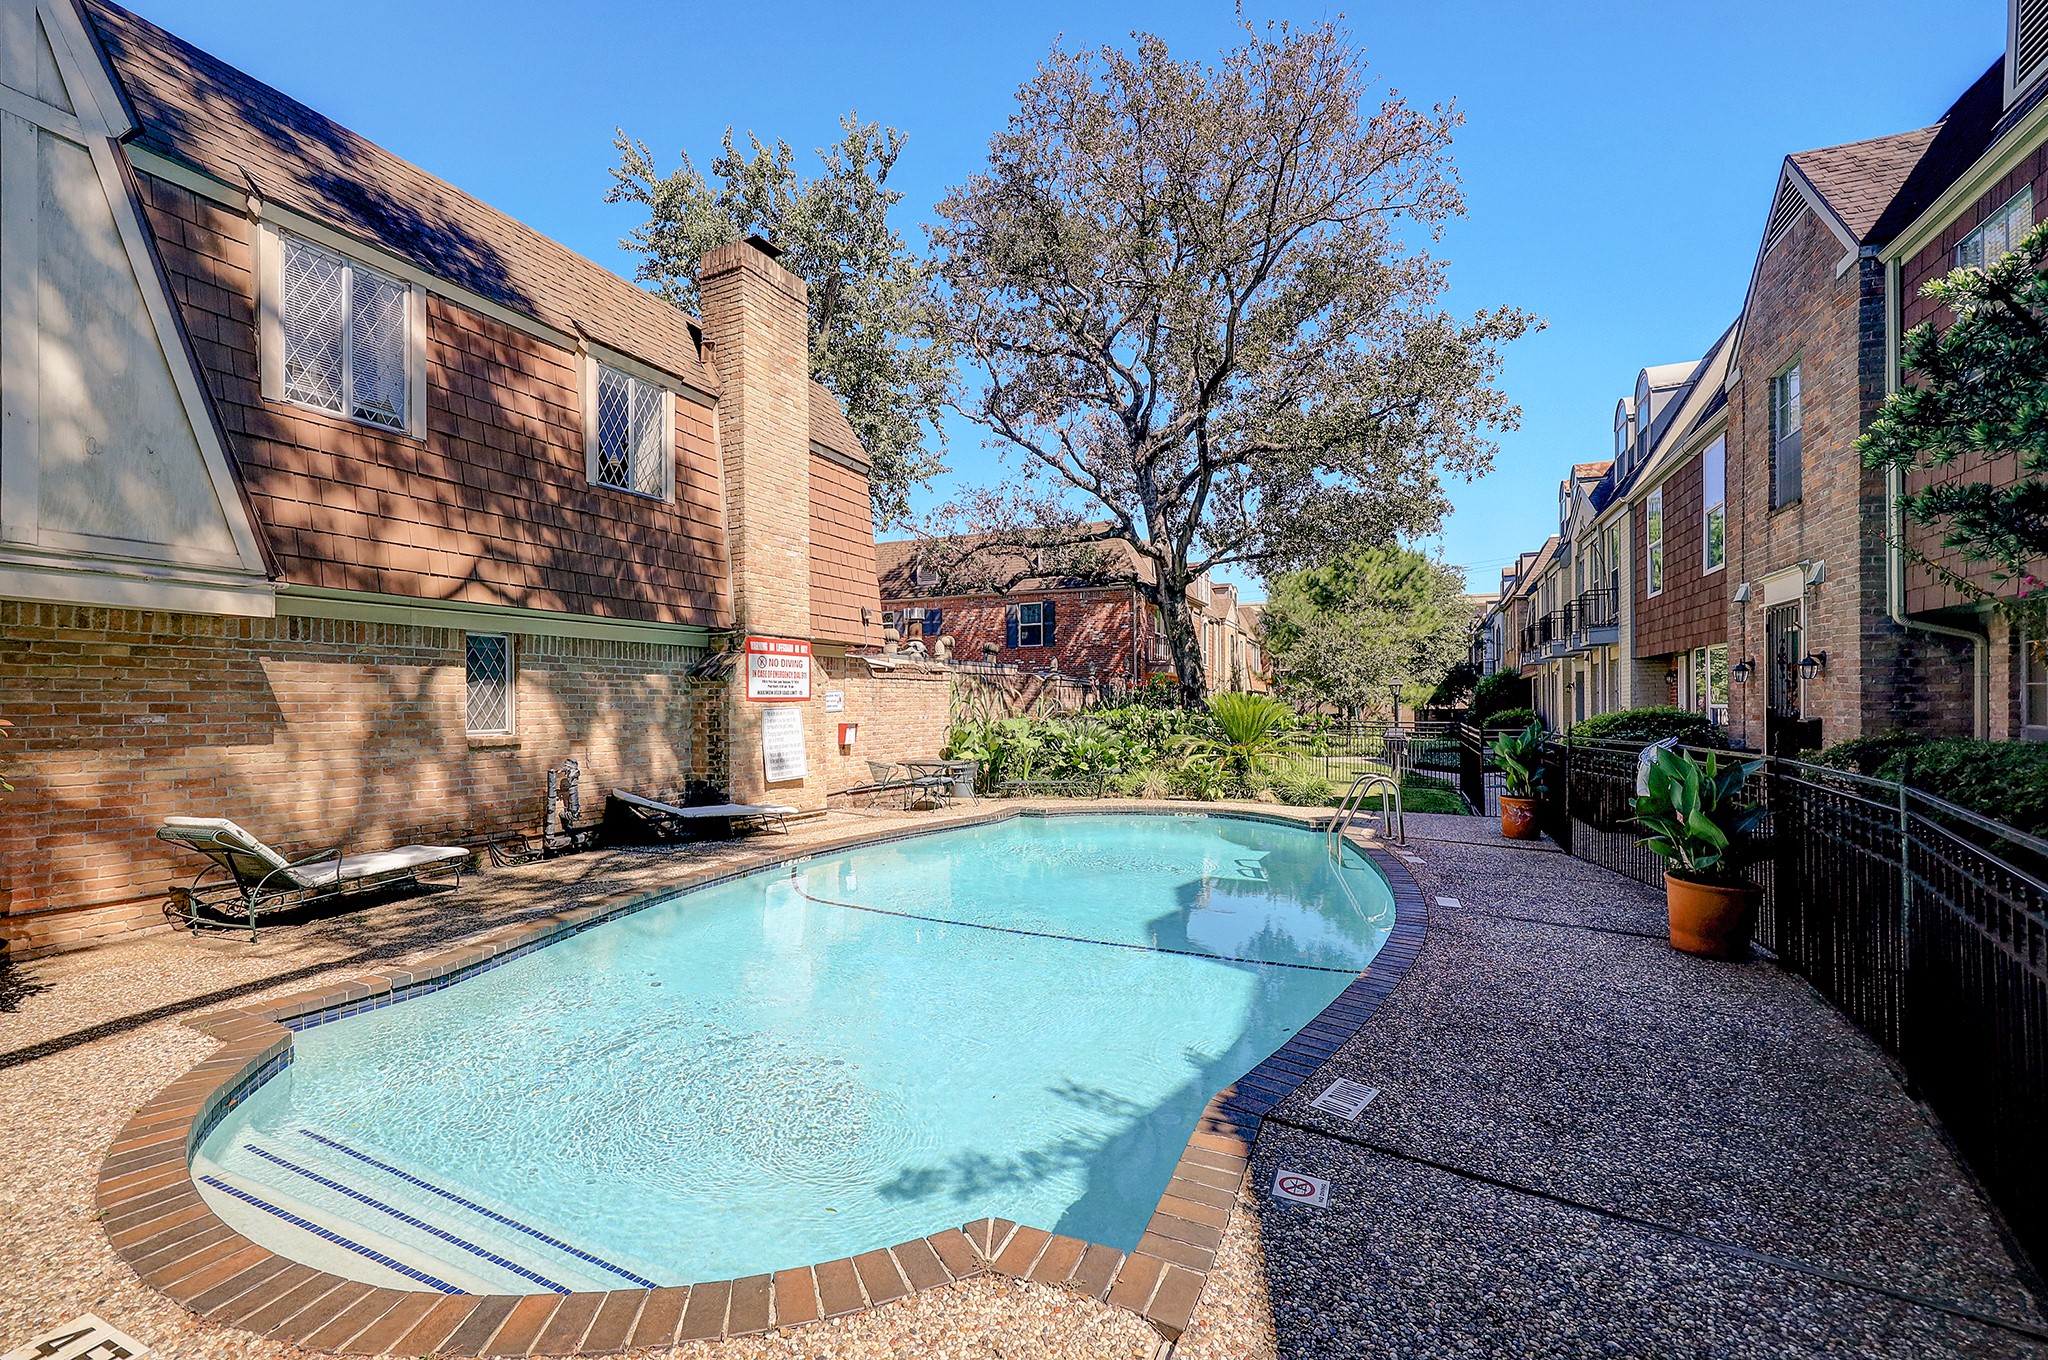 A community pool is surrounded by a manicured landscape and offers the perfect place to relax.